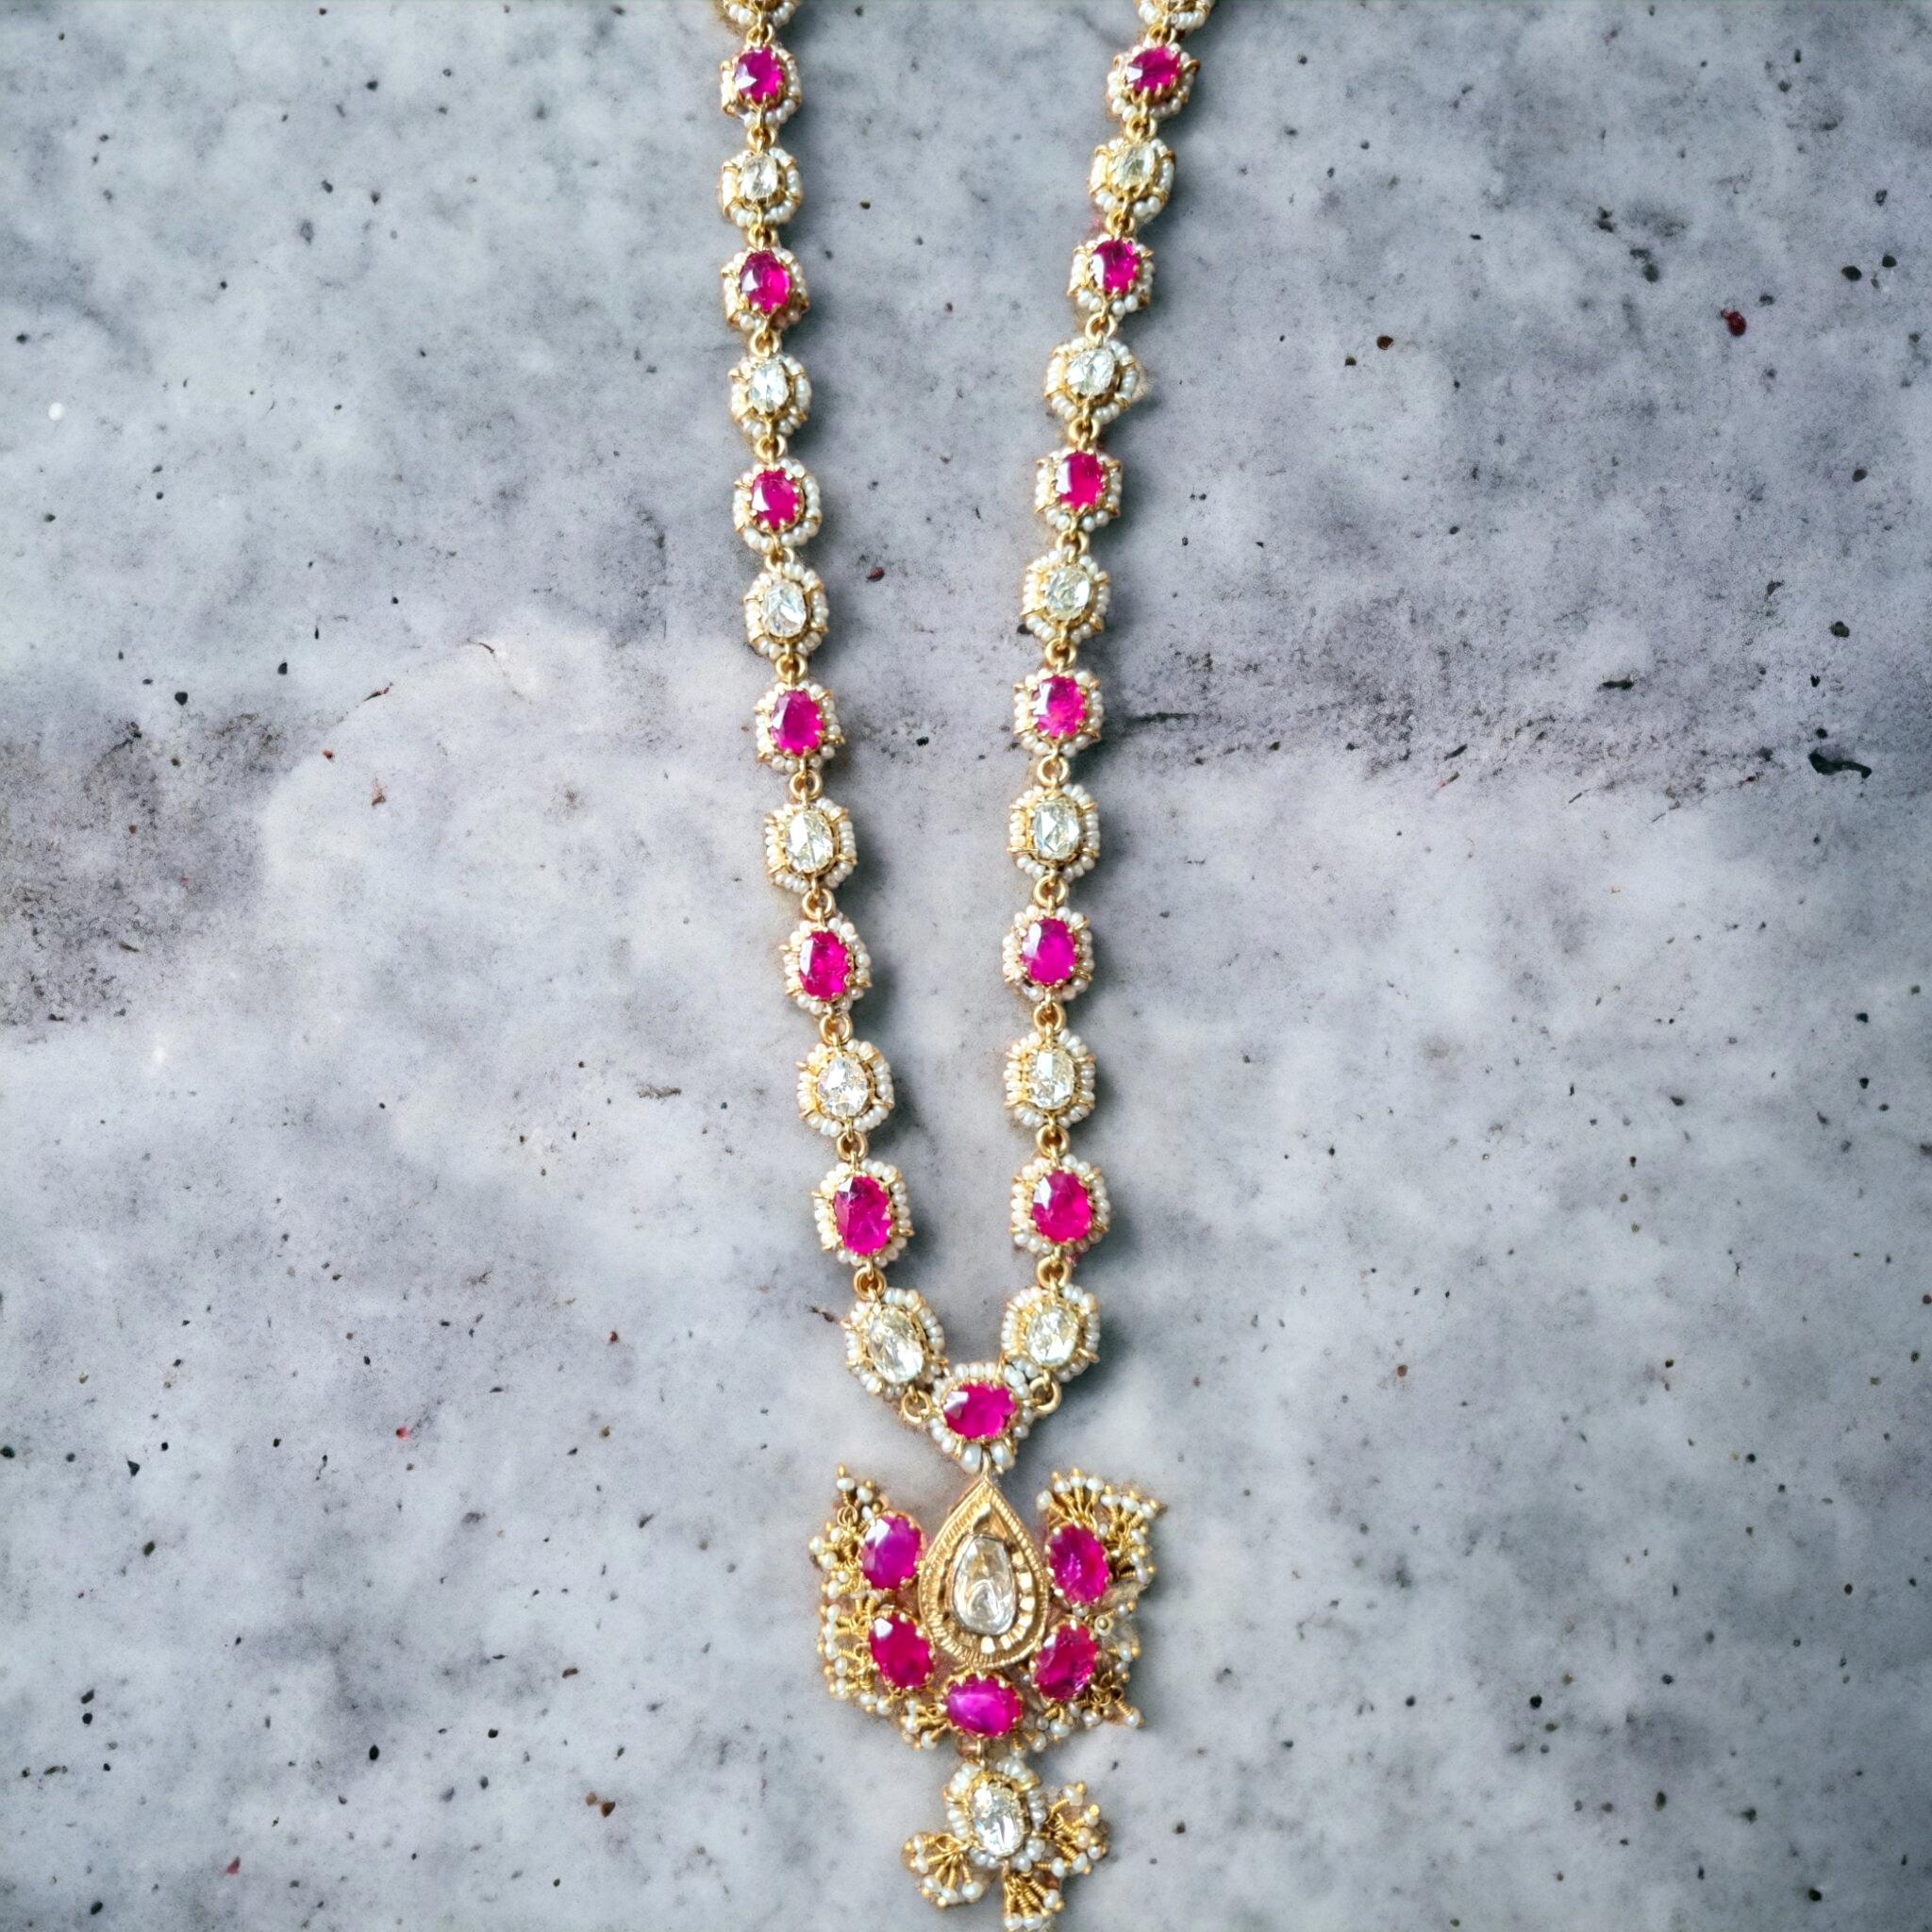 OLD BURMA (MYANMAR) UNTREATED, UNHEATED RUBY, ROSE CUT DIAMOND AND SEED PEARL NECKLACE. LATE 19TH CENTURY. (Gujarat, India)

Consisting of a pendant centrally set and designed as an alternating series of oval-cut ruby and old-cut diamond clusters,